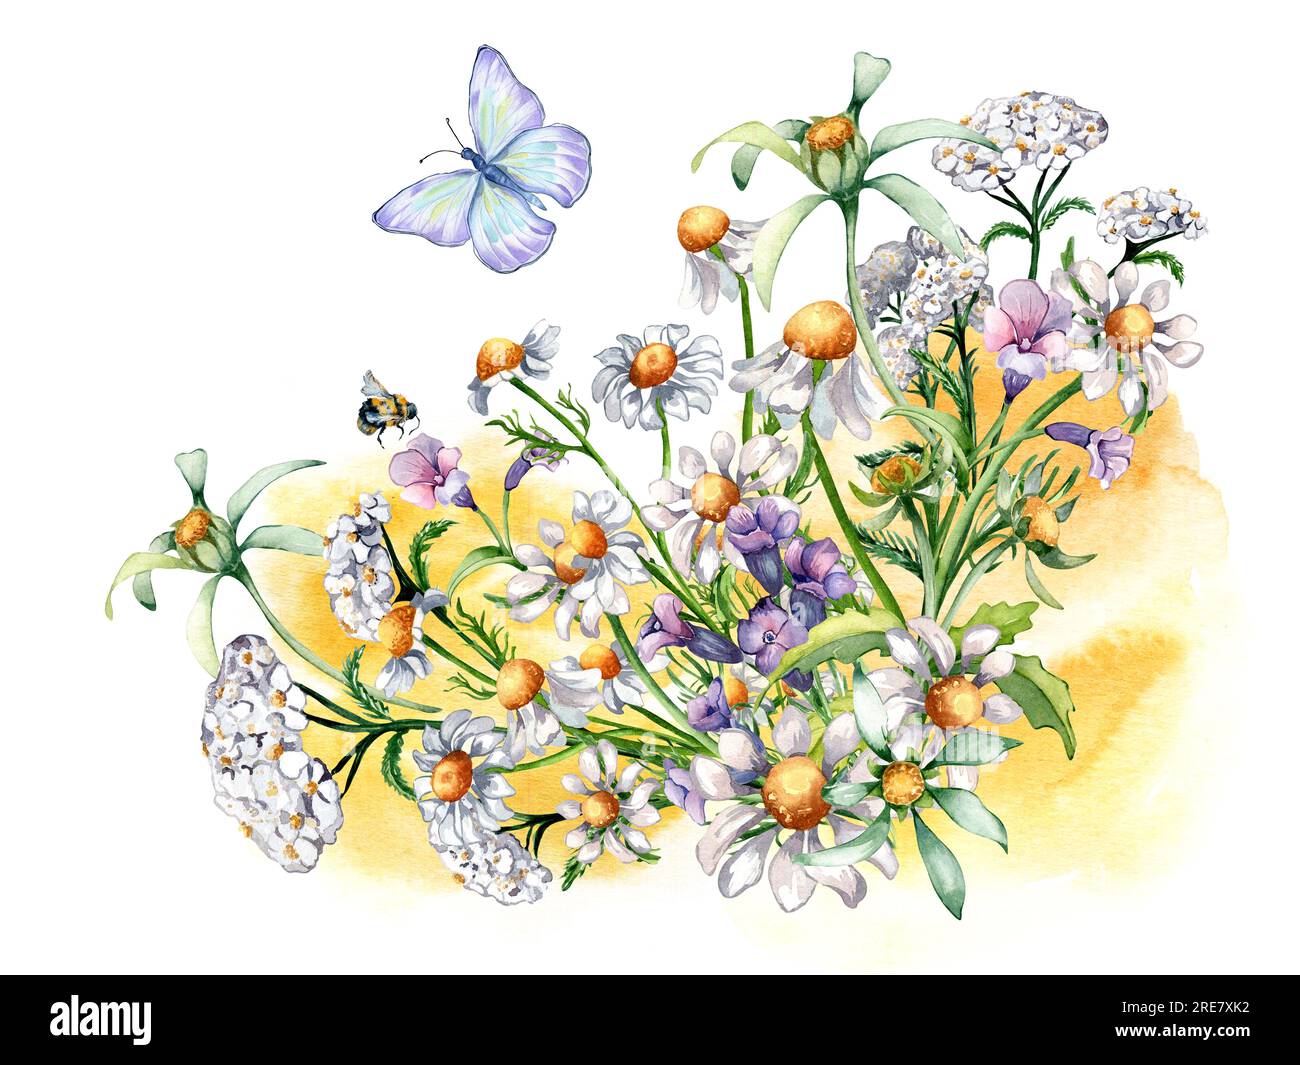 Composition of chamomile, yarrow, medicinal plants, watercolor splash illustration isolated on white. Purple, yellow flower, bee, butterfly hand drawn Stock Photo